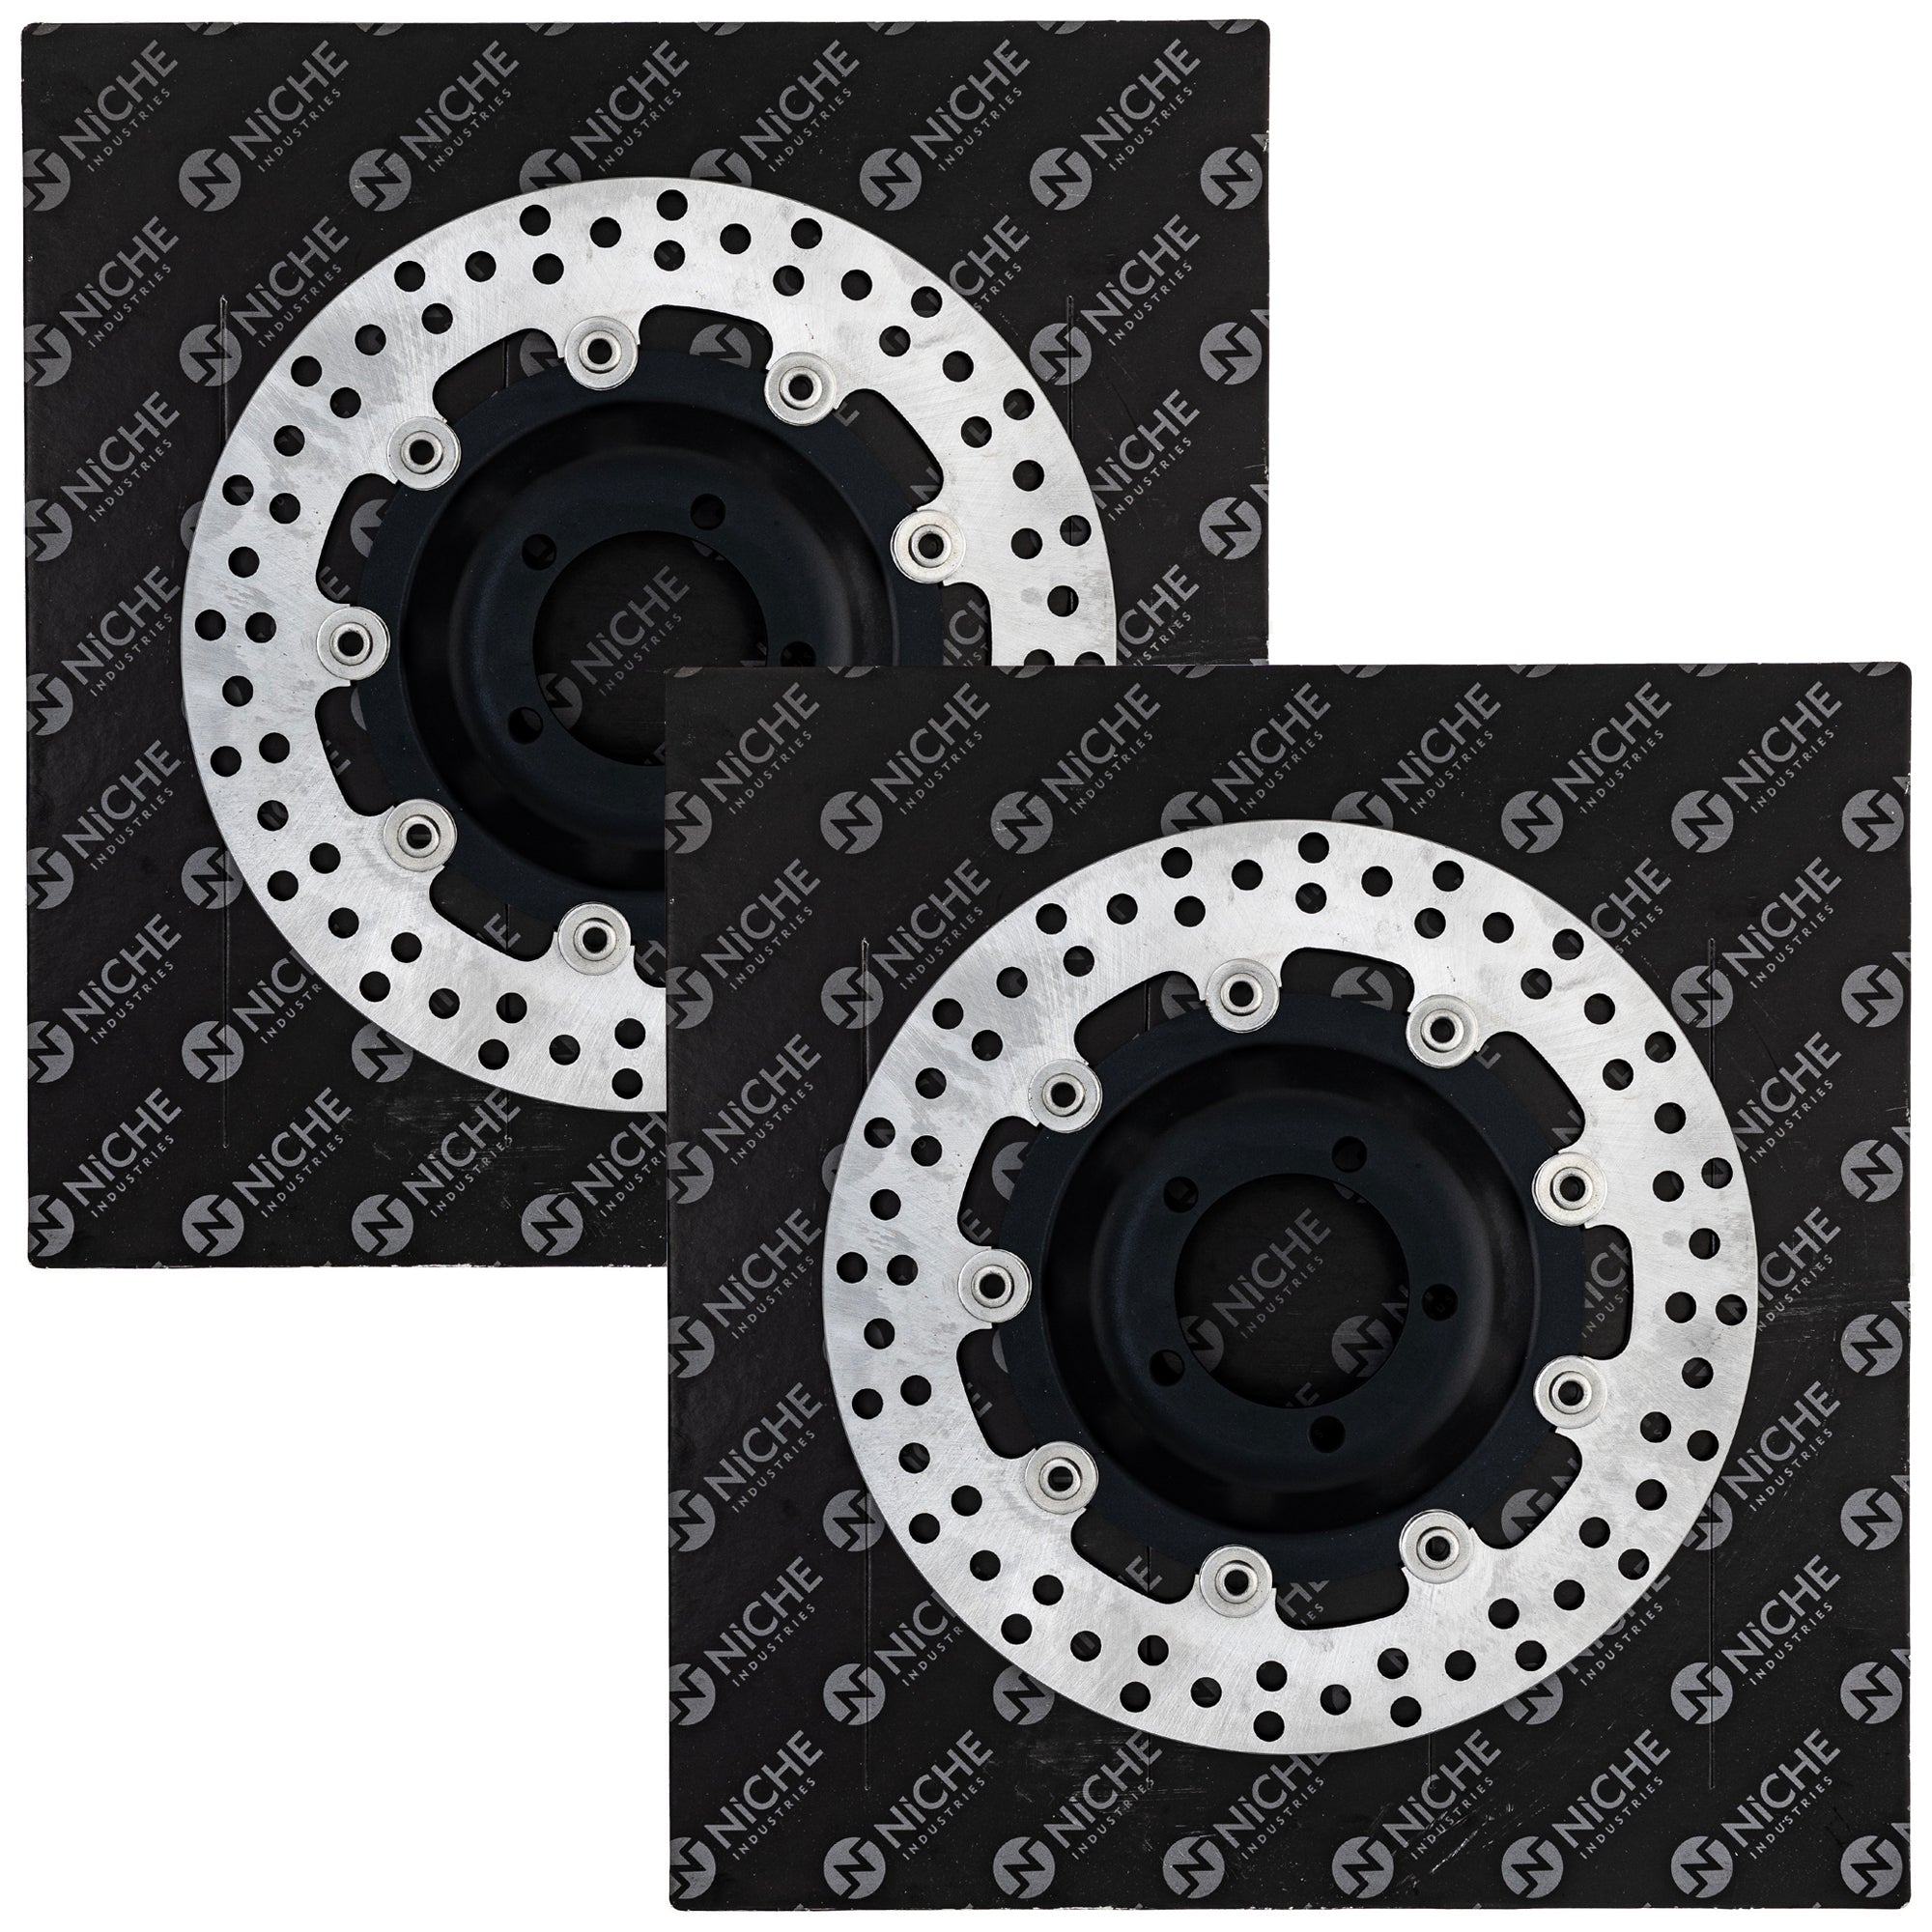 NICHE 519-CRT2433R Front Brake Rotor 2-Pack for zOTHER R90S R90 R80